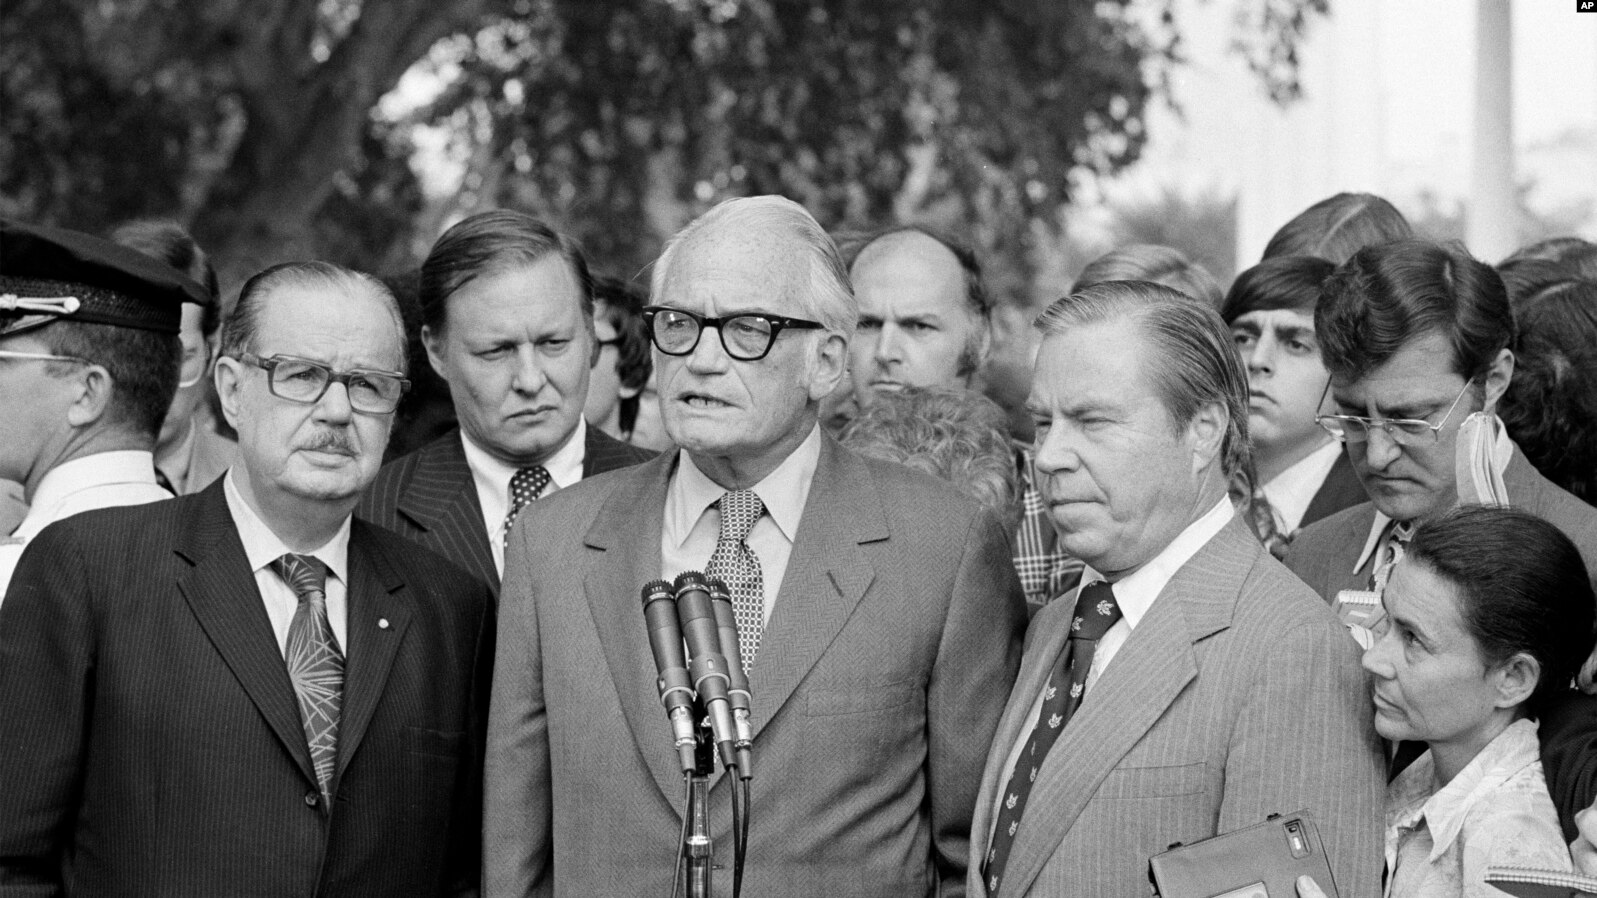 Barry Goldwater (R-AZ) riz., center, speaks after meeting with President Richard Nixon, Aug. 7, 1974, about resigning. With him are Senate Republican Leader Hugh Scott of Pennsylvania, left, and House GOP Leader John Rhodes of Arizona, .